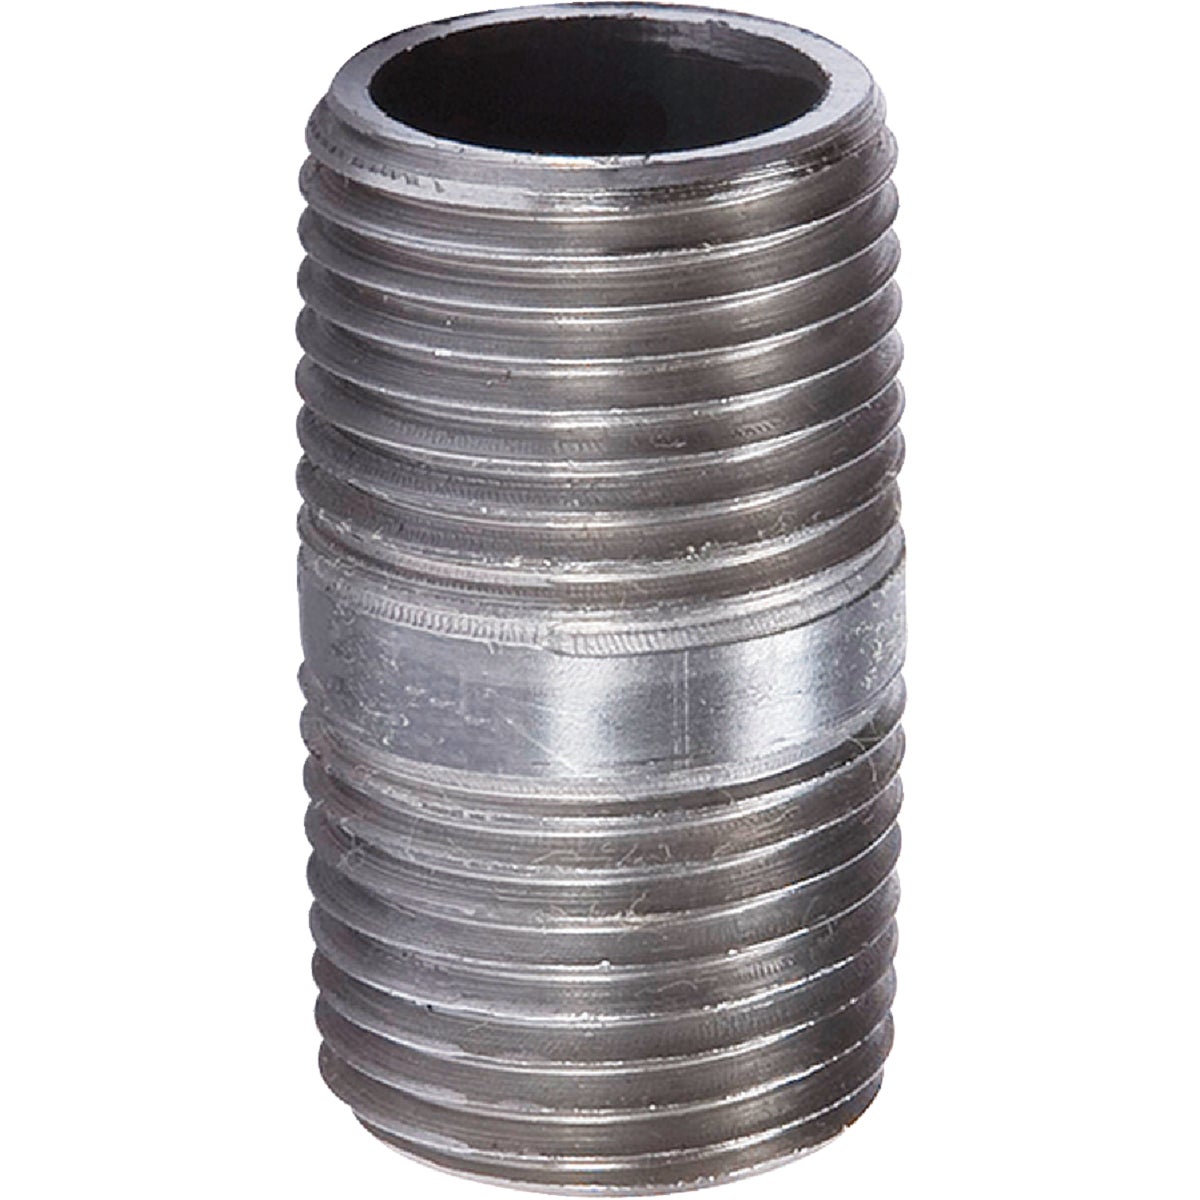 Item 401389, Welded steel pipe, black coated to prevent rusting, meets ASTM A/53 